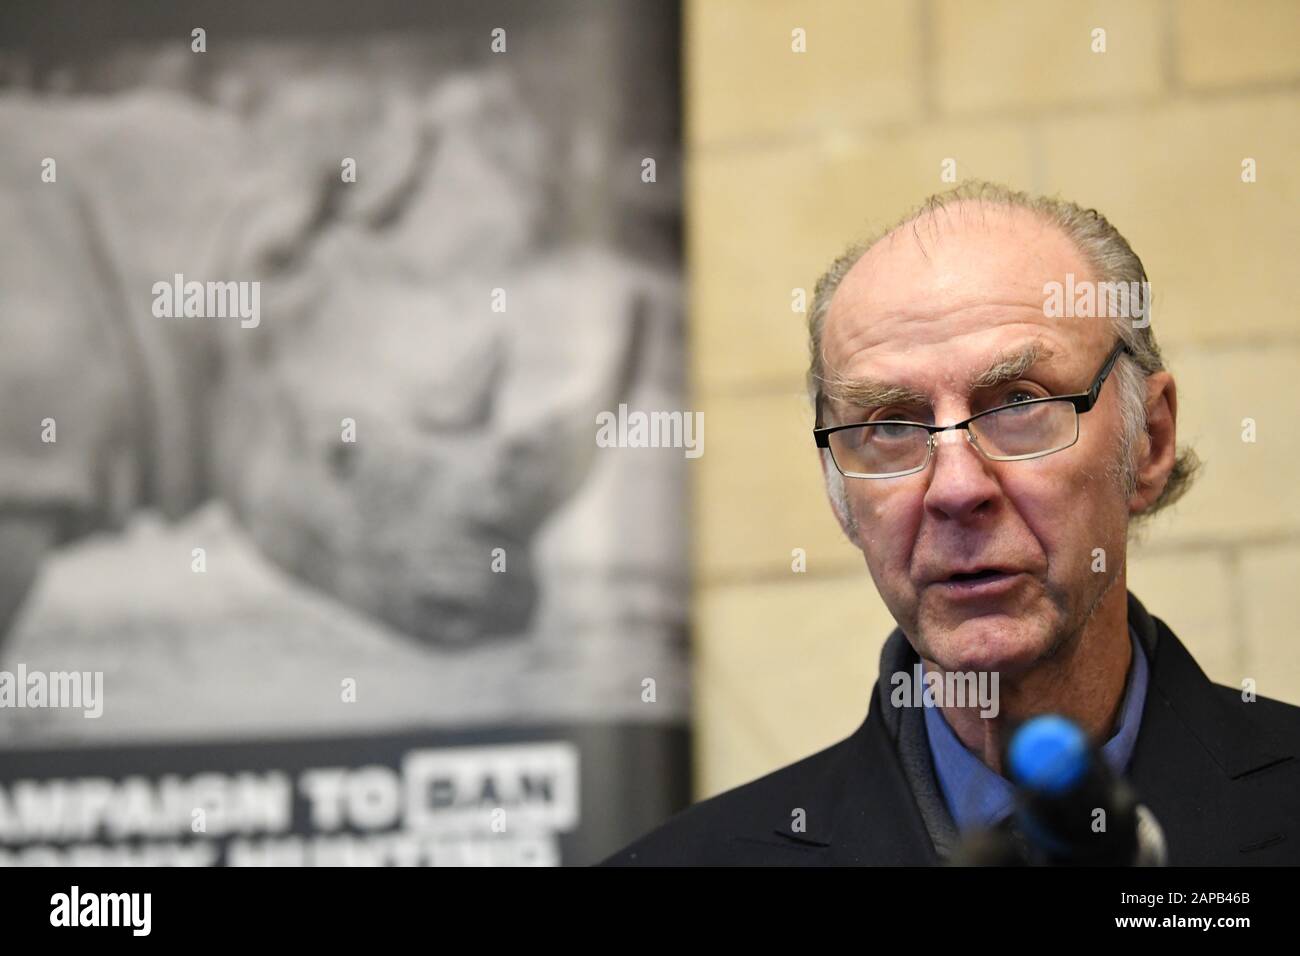 Ranulph Fiennes at the Houses of Parliament in Westminster, London, during an event calling for a ban on trophy hunting imports. Stock Photo